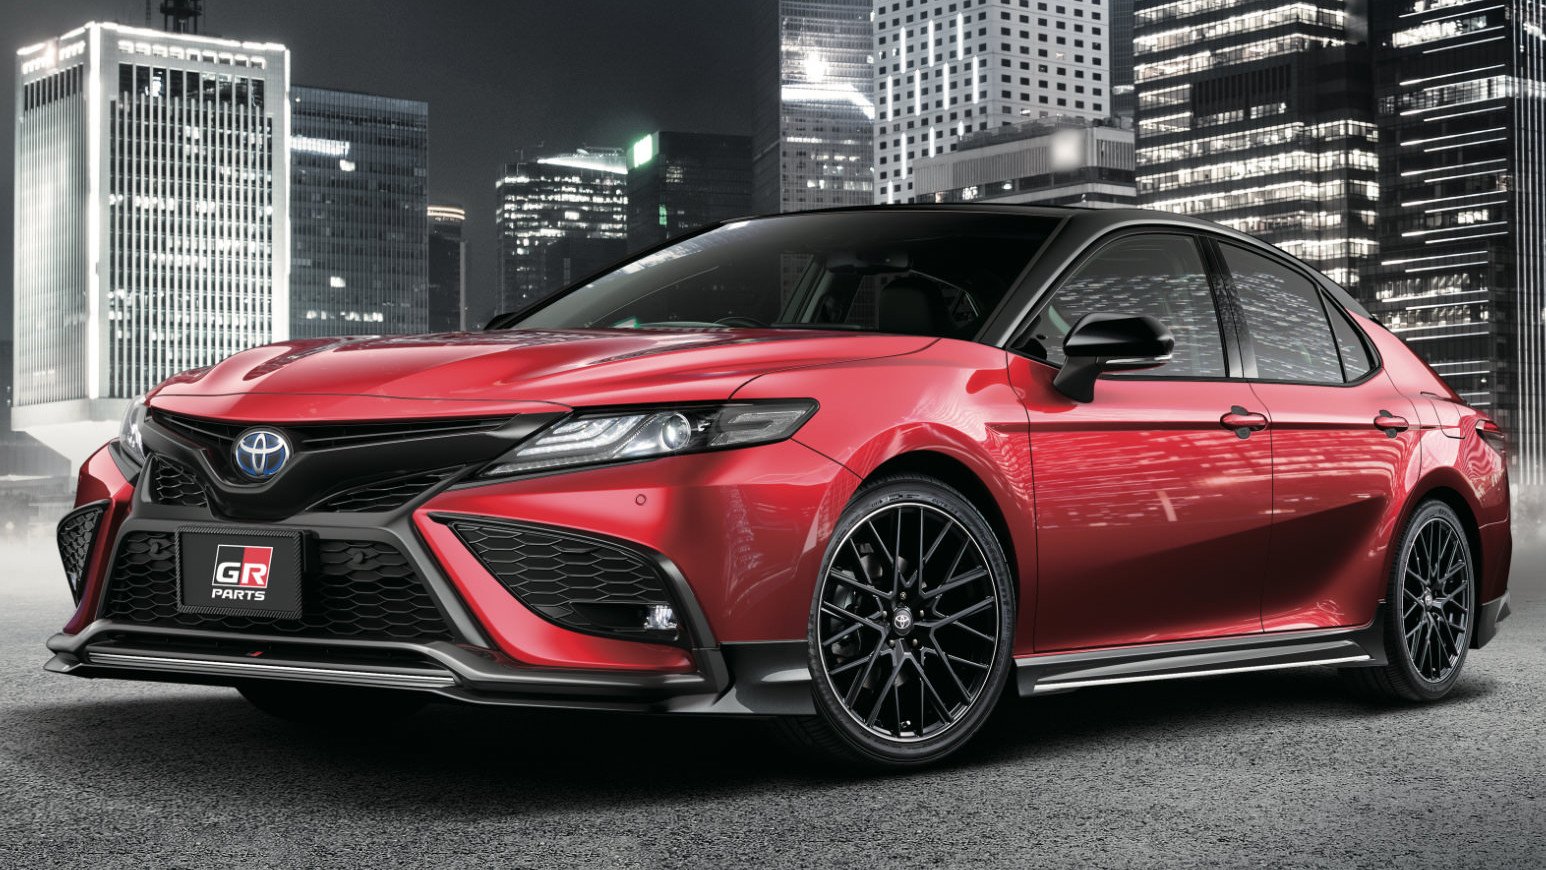 Front View of a Red Camry with the Gazoo Racing Kit